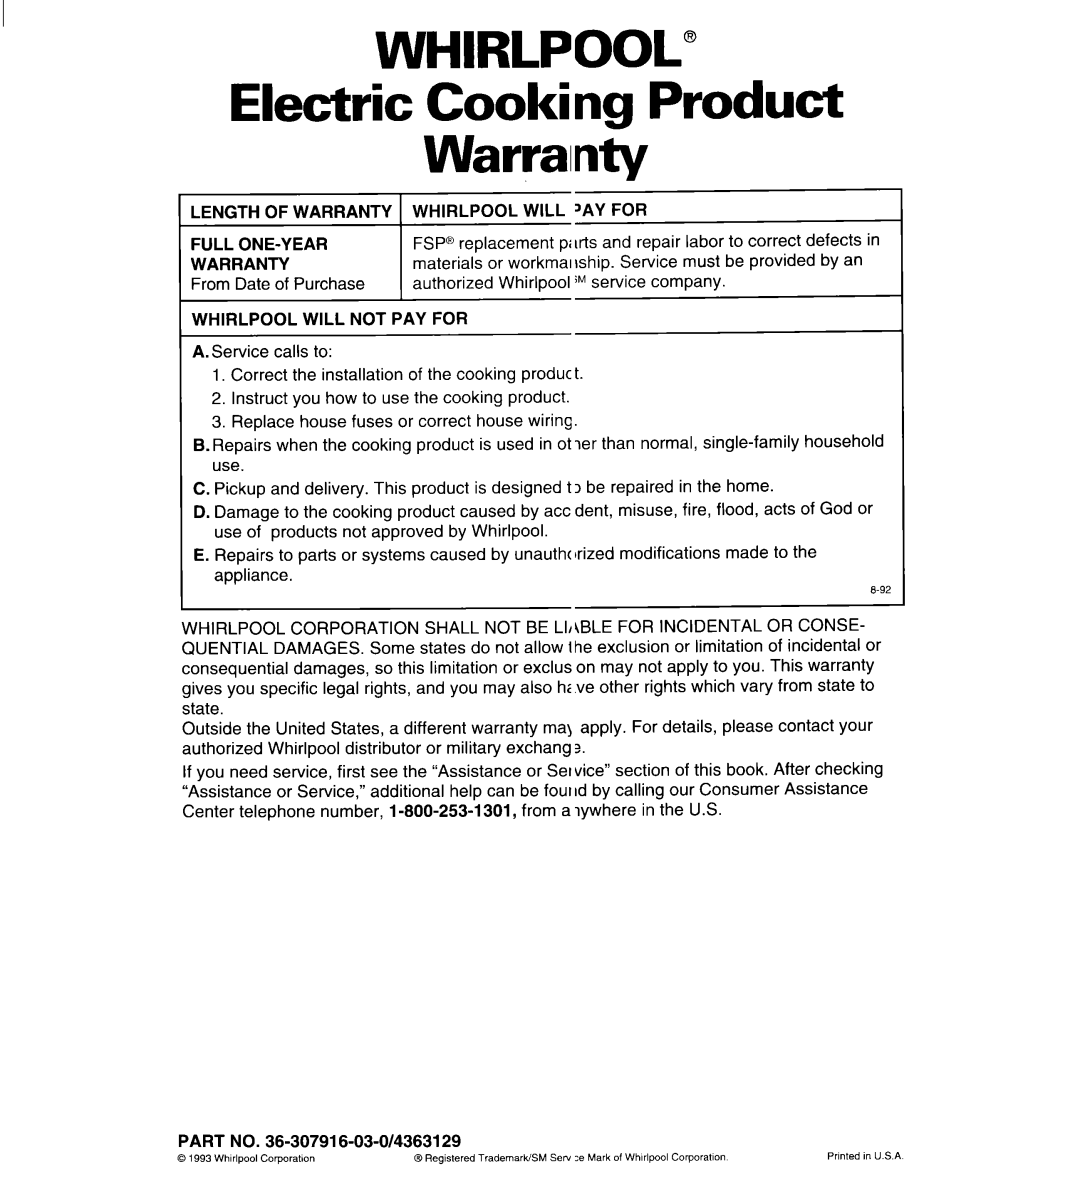 Whirlpool RC8900XA, RC8920XA WHIRLPOOL” Electric Cooking Product Warrainty, Length Of Warranty Whirlpool Will ‘Ay For 